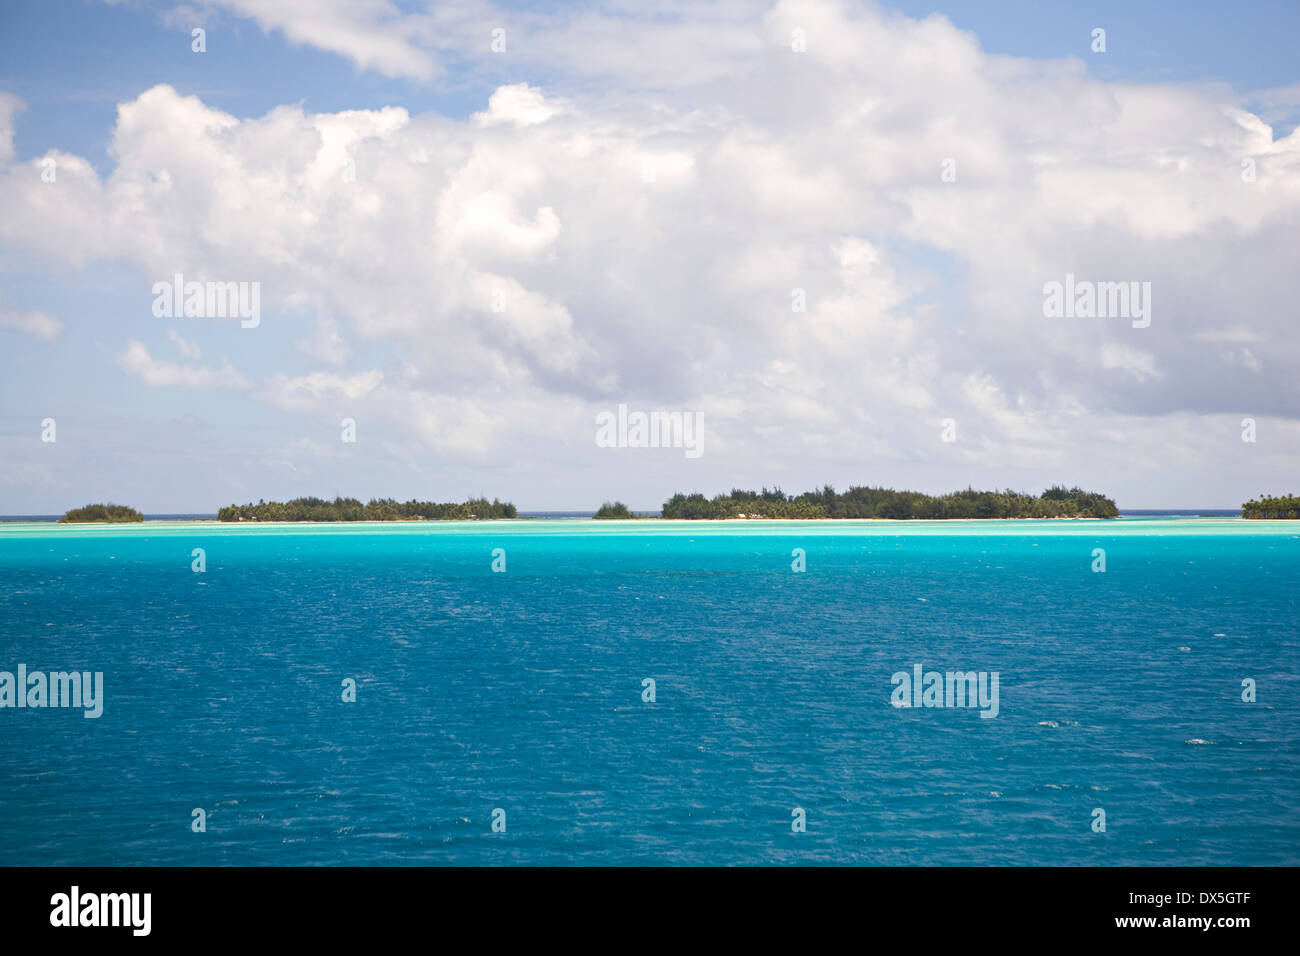 Tahitian blue ocean seascape under blue sky with clouds Stock Photo